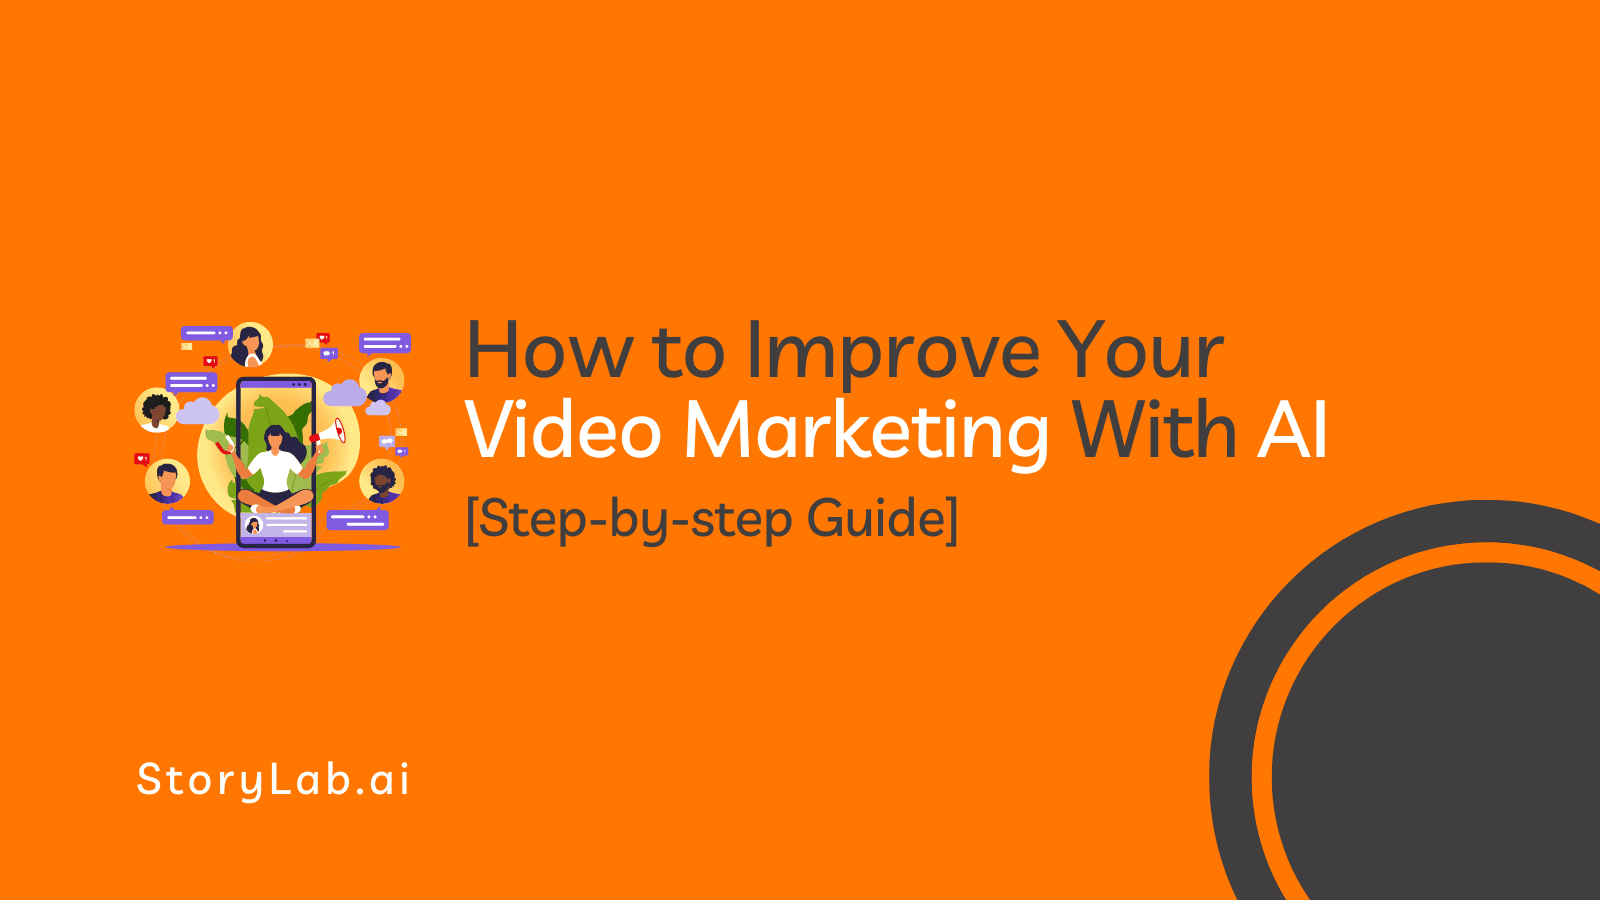 How to Improve Your Video Marketing With AI Full Guide